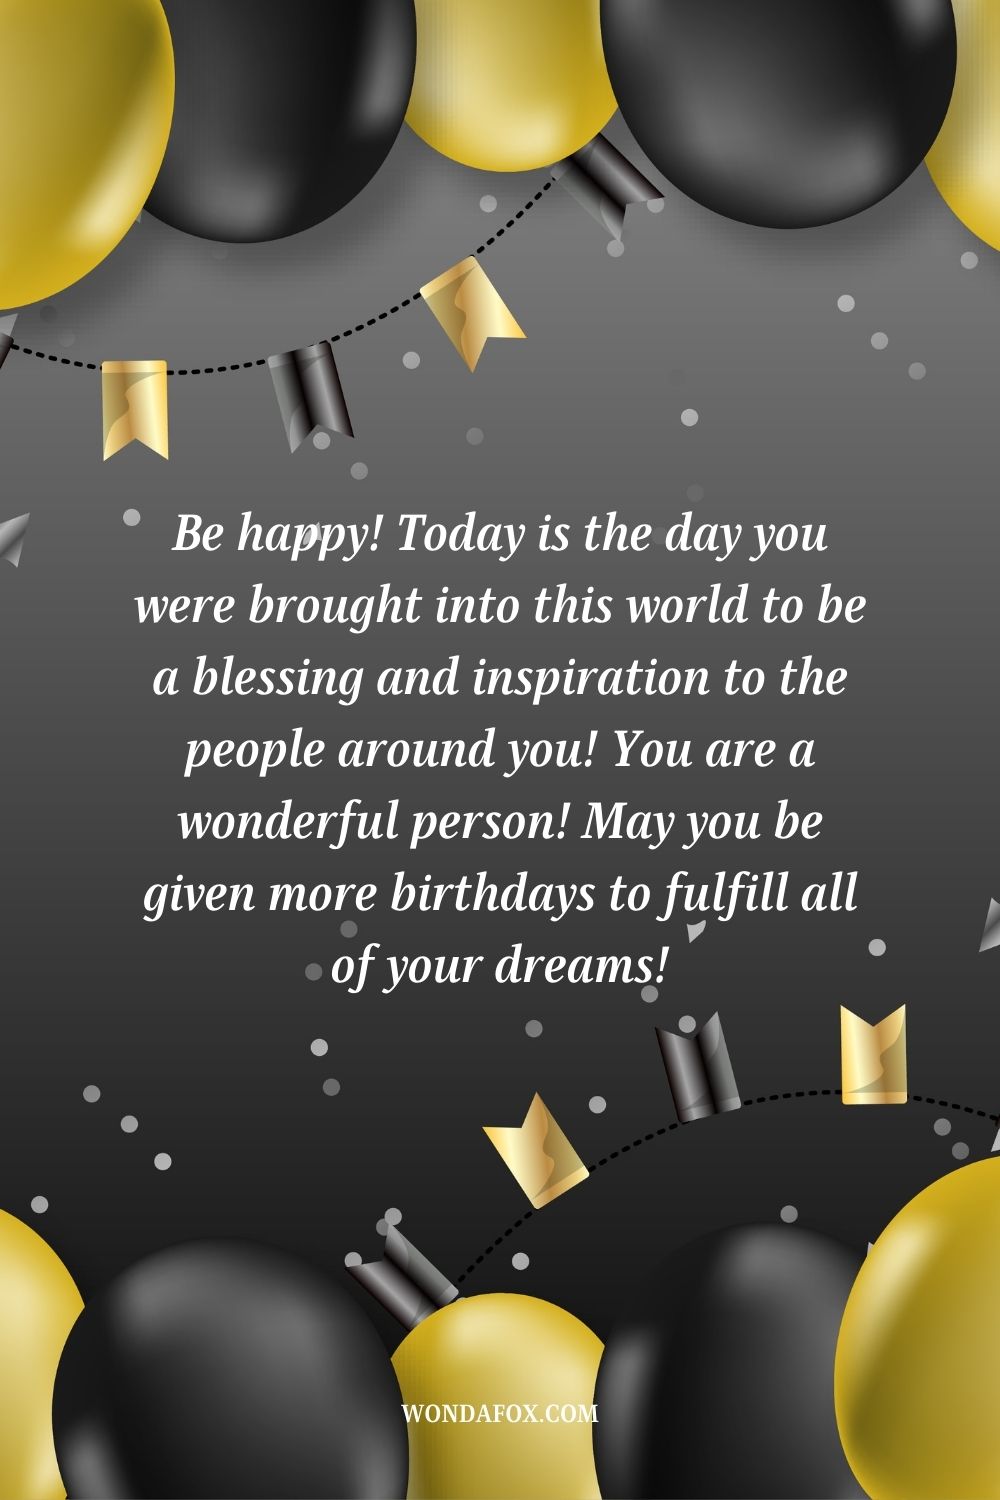 “Be happy! Today is the day you were brought into this world to be a blessing and inspiration to the people around you! You are a wonderful person! May you be given more birthdays to fulfill all of your dreams!”